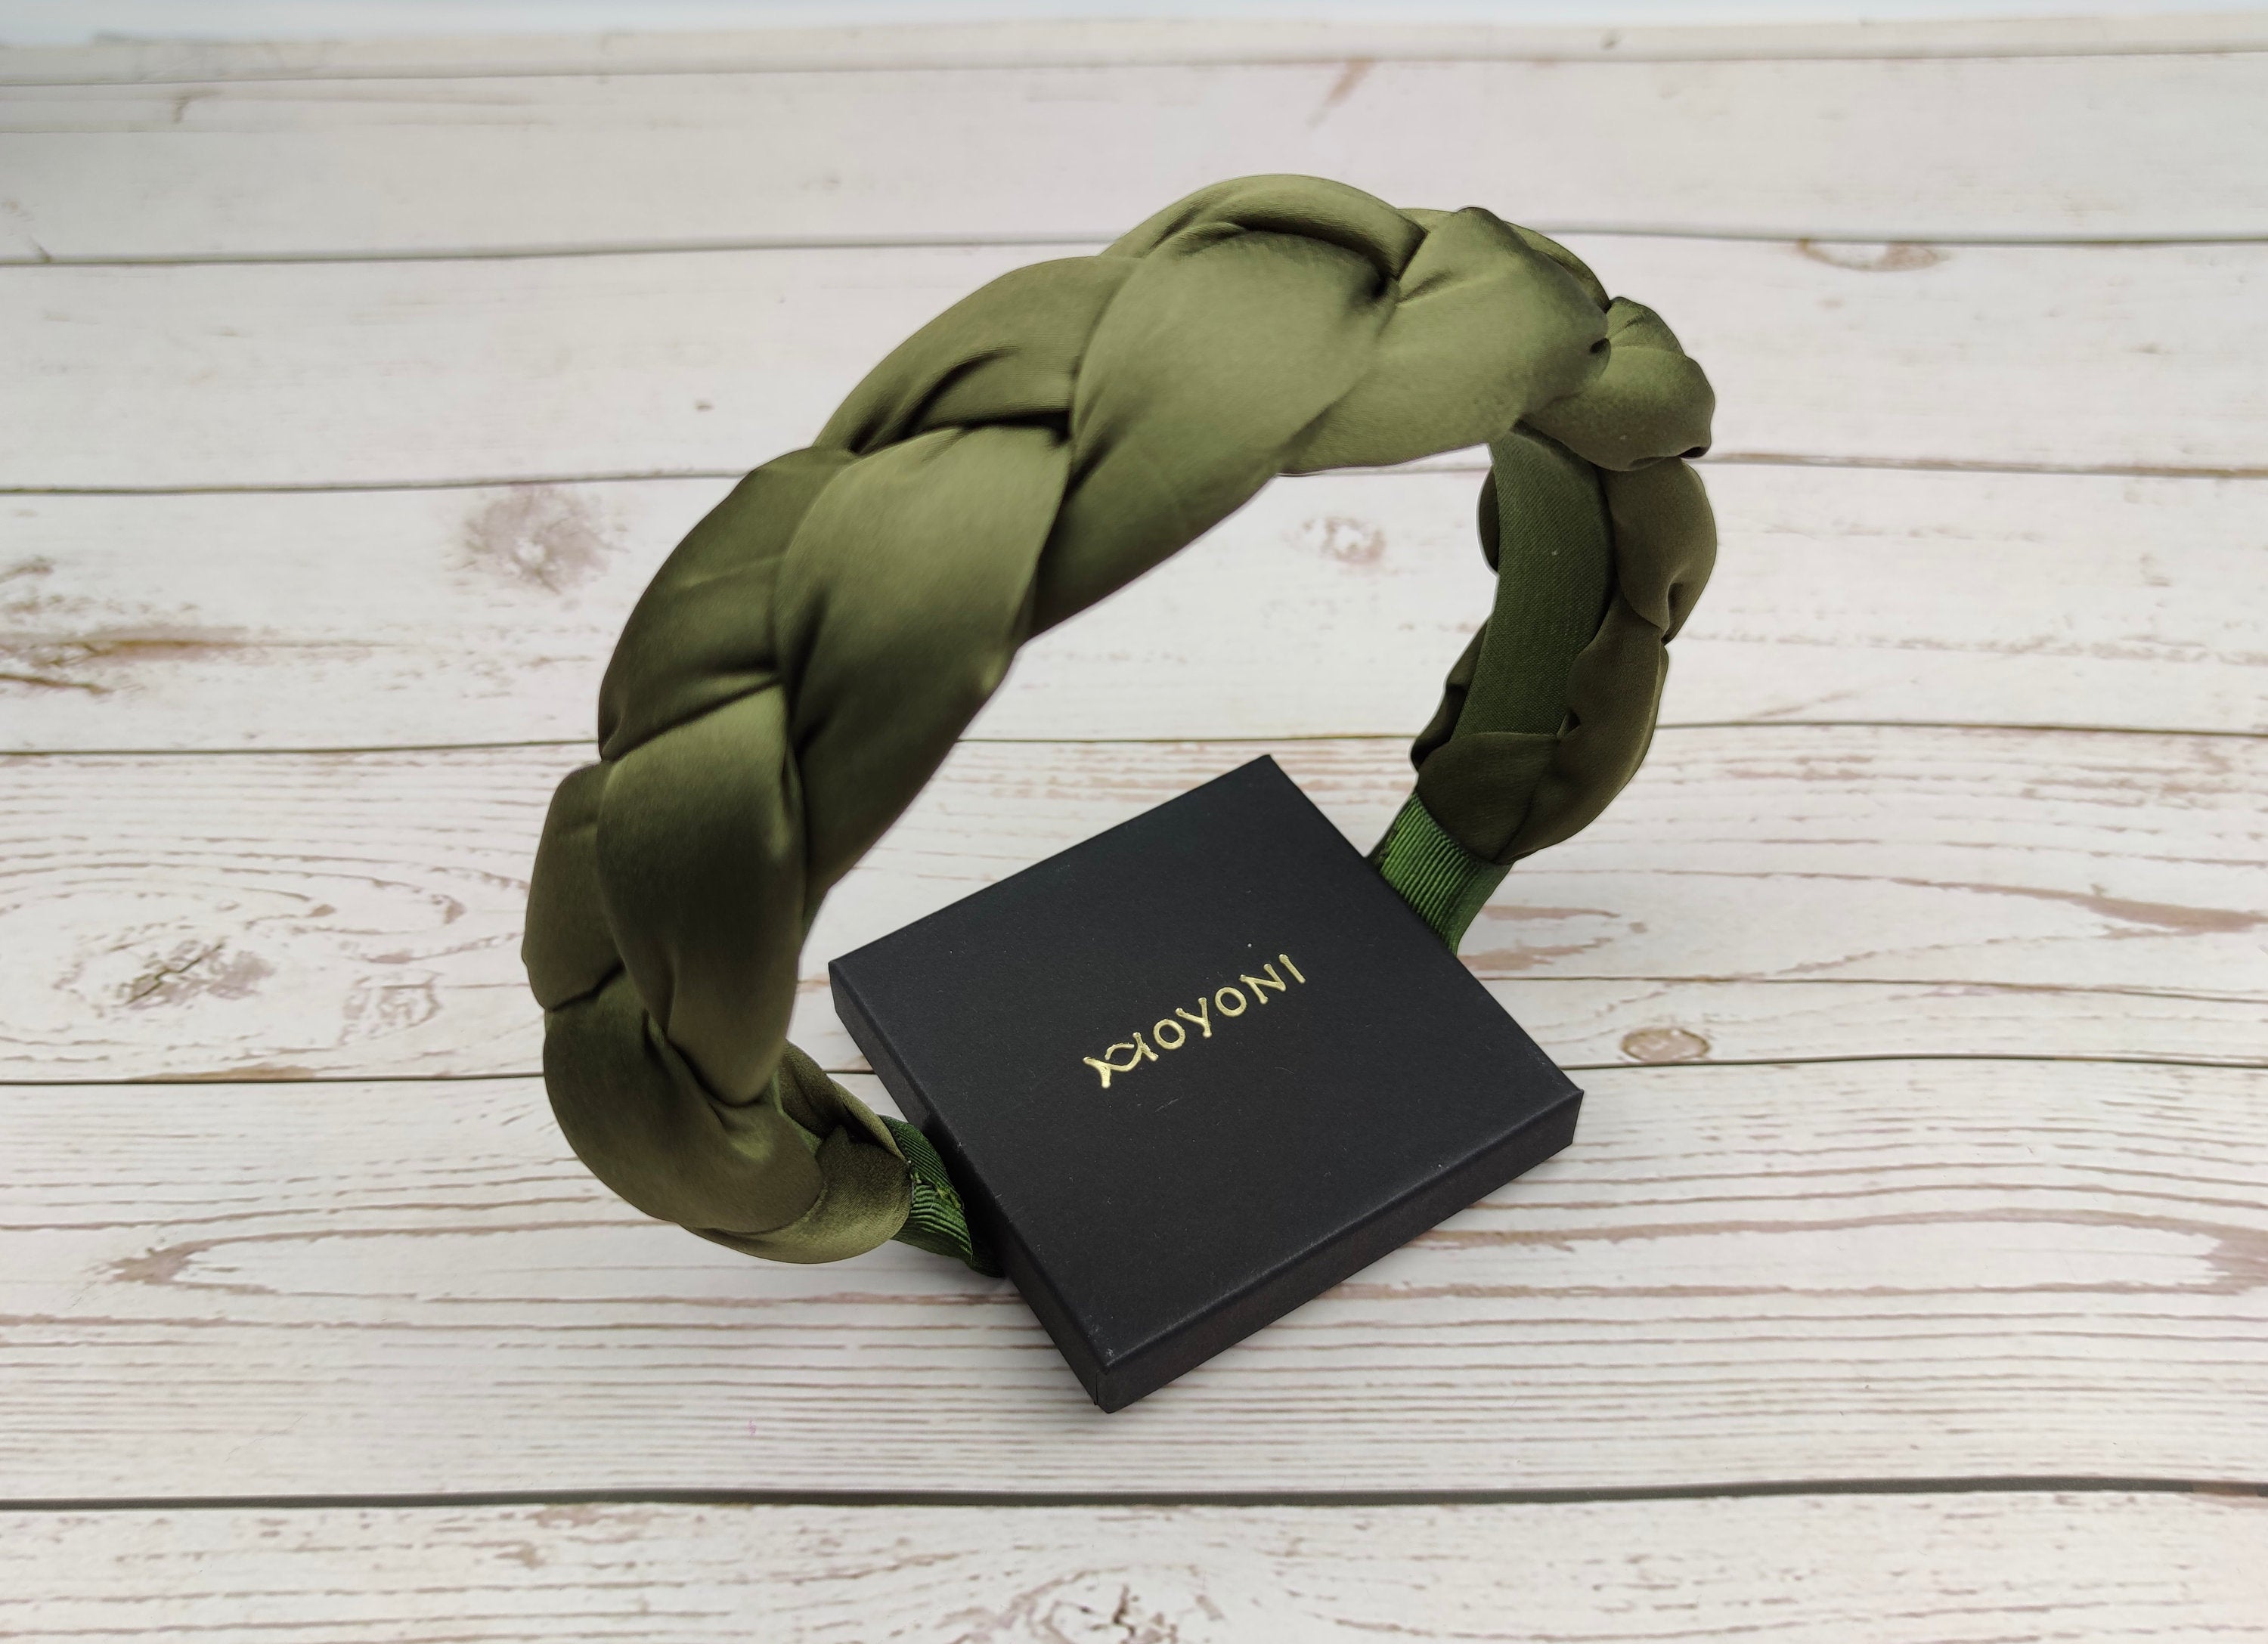 The perfect accessory for any hairstyle: a chic braided padded satin headband in army green.